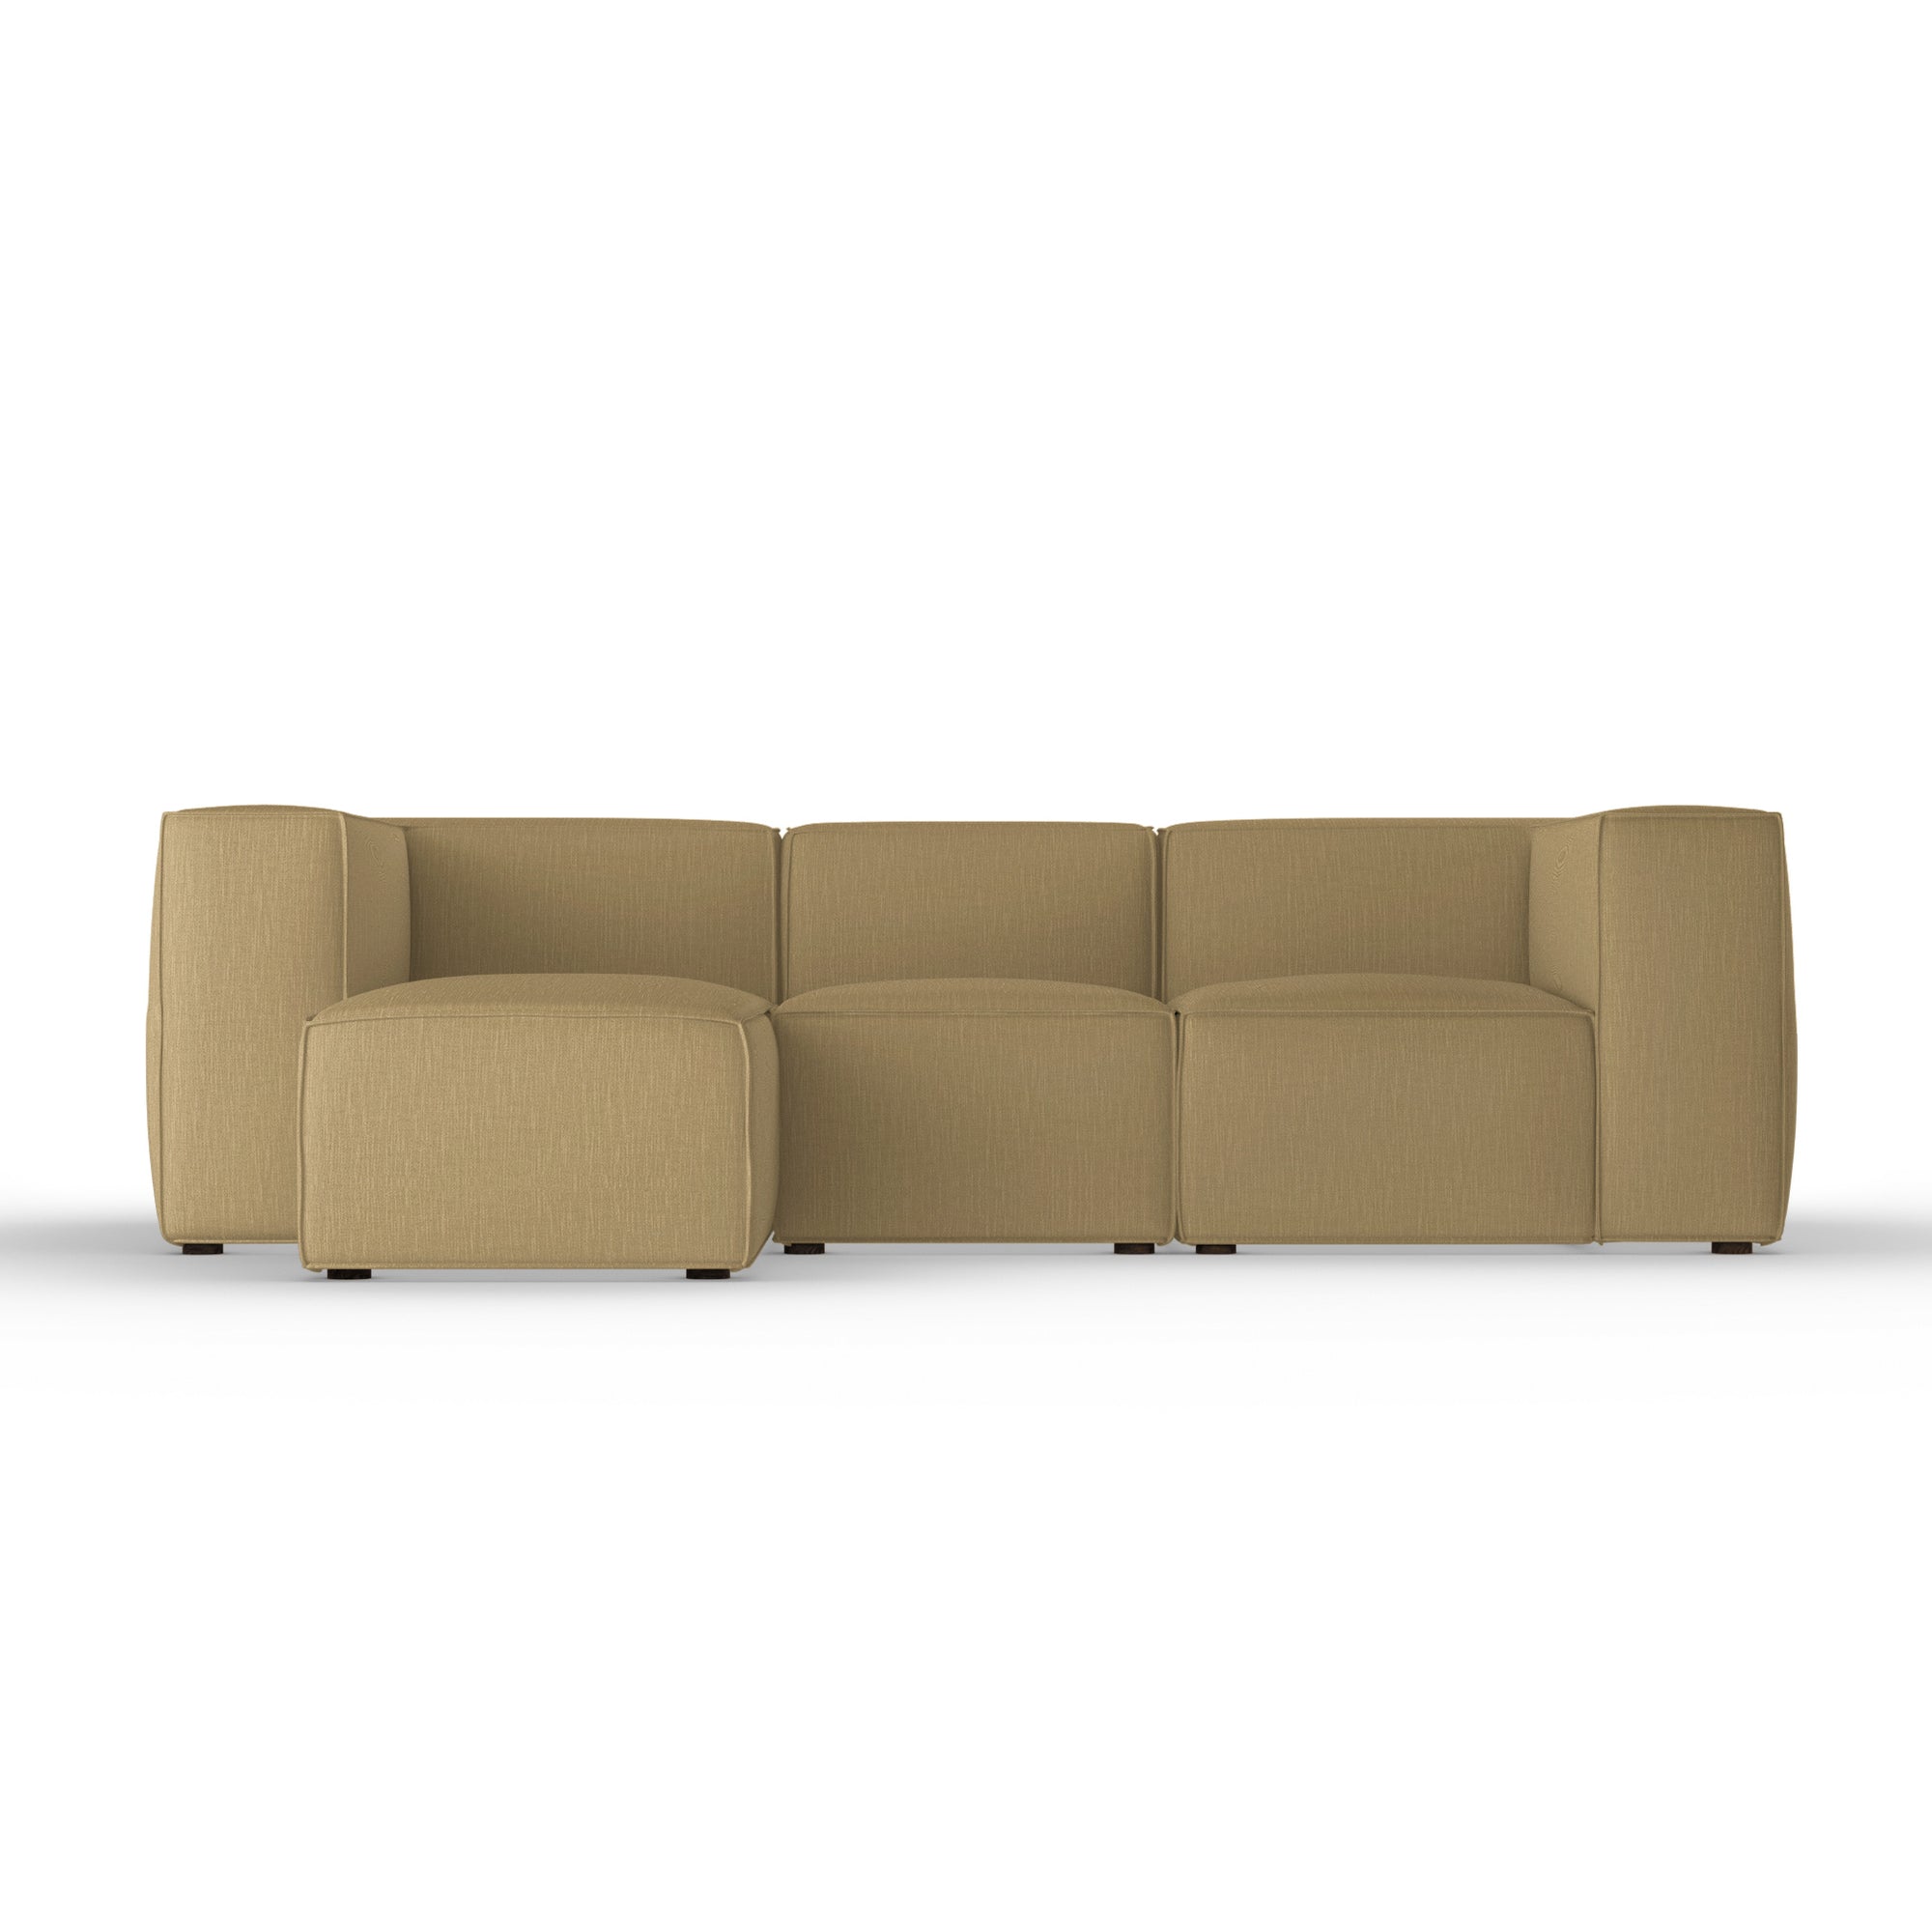 Varick Left-Chaise Sectional - Marzipan Box Weave Linen